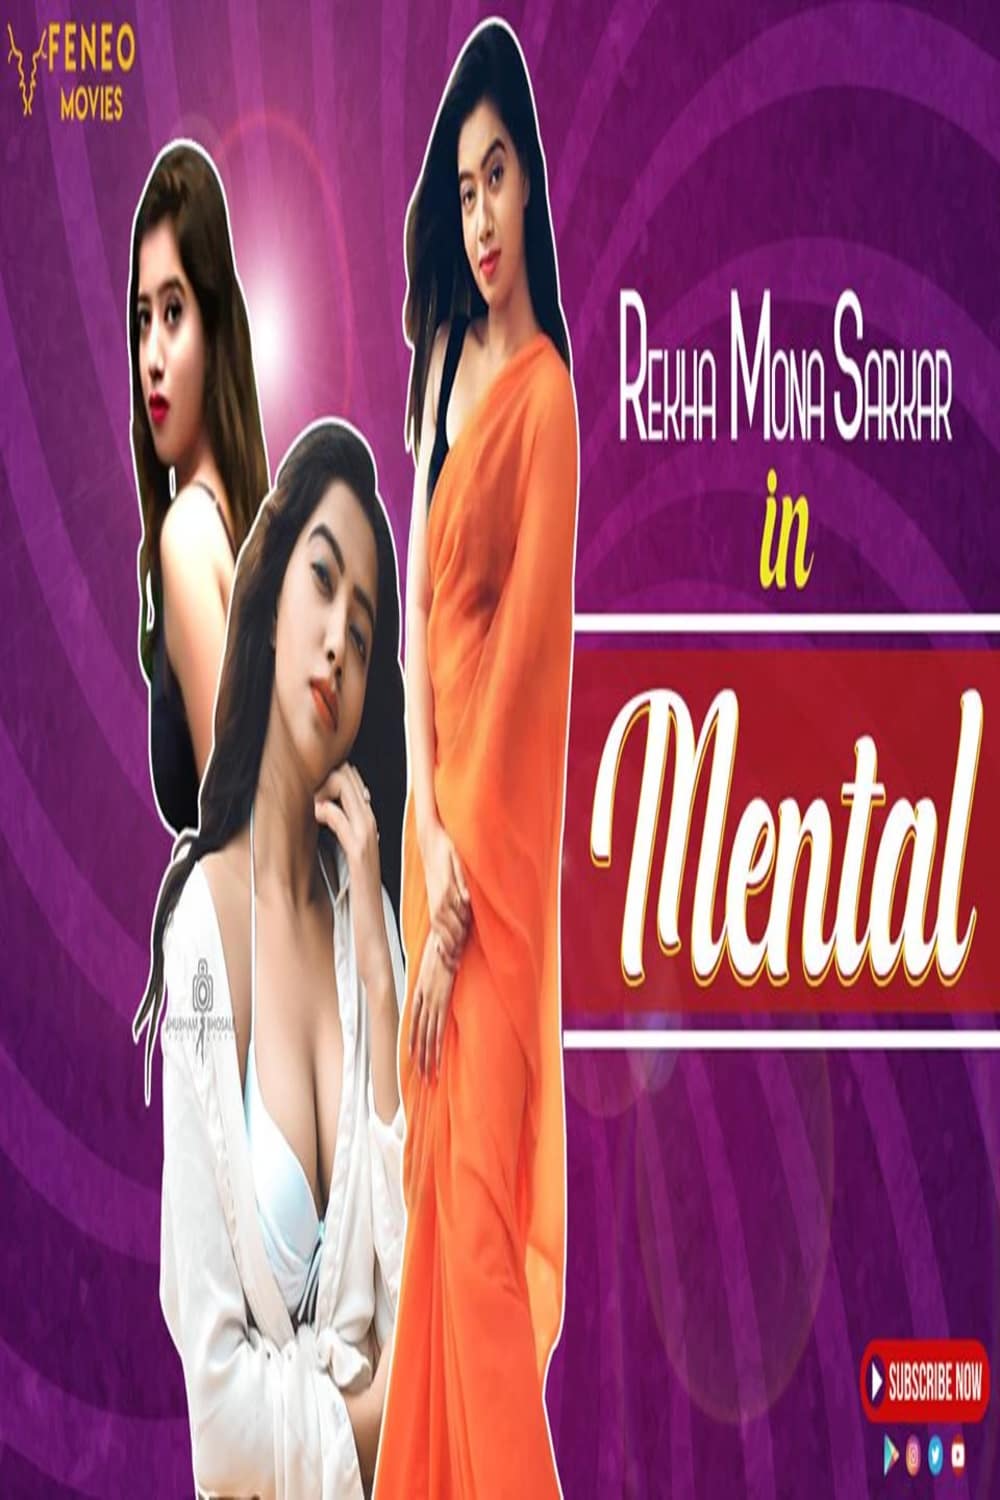 You are currently viewing 18+ Mental 2020 FeneoMovies Hindi S01E02 Web Series 720p HDRip x264 180MB Download & Watch Online